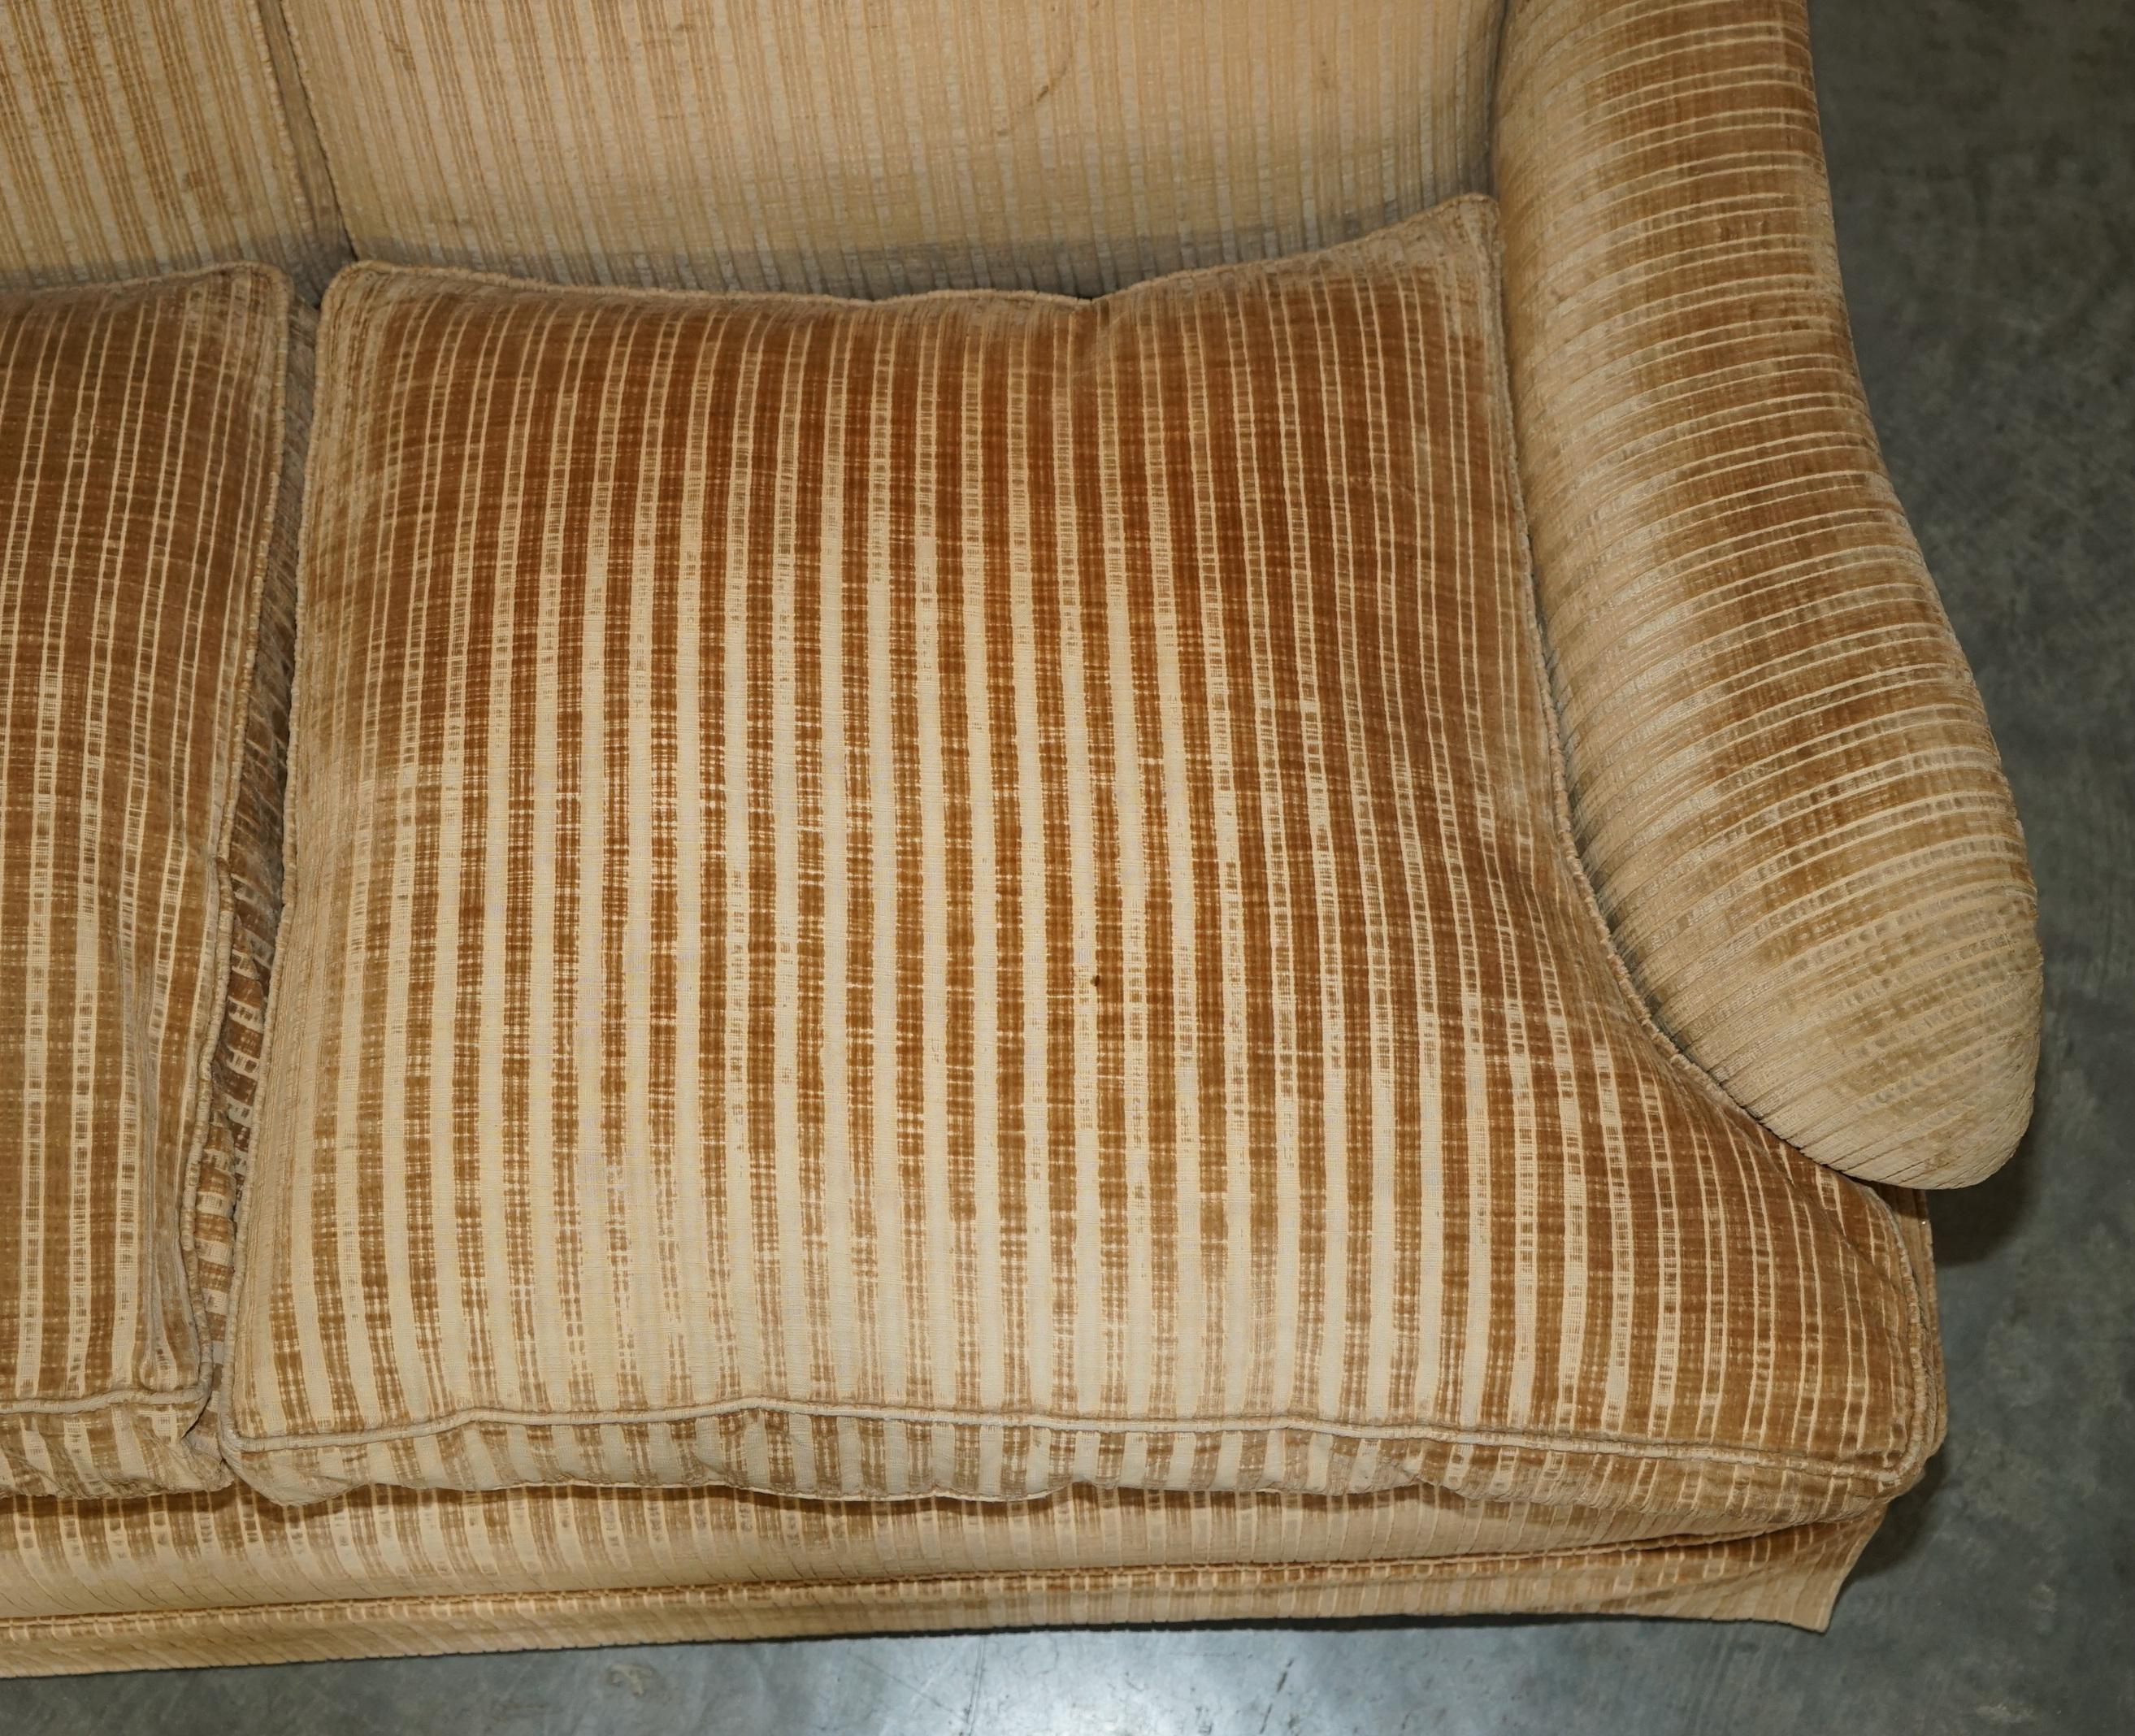 Upholstery LOVELY HOWARD & SON'S / CHAIRS LTD TWO SEAT SOFA FEATHER FILLED SEAT CUSHIONs For Sale